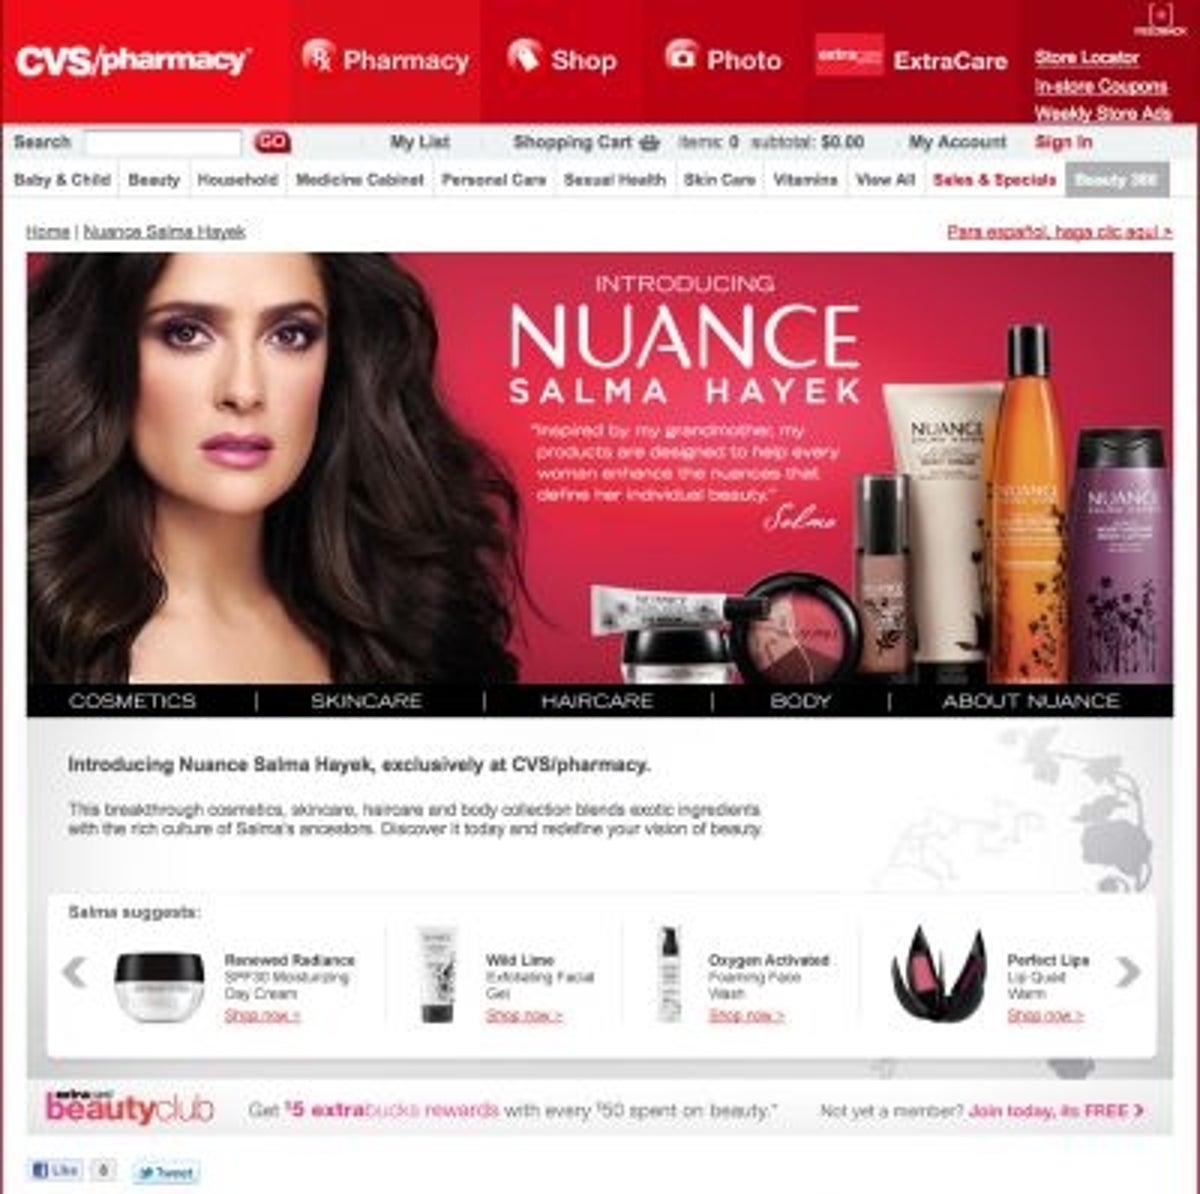 Nuance products at cvs